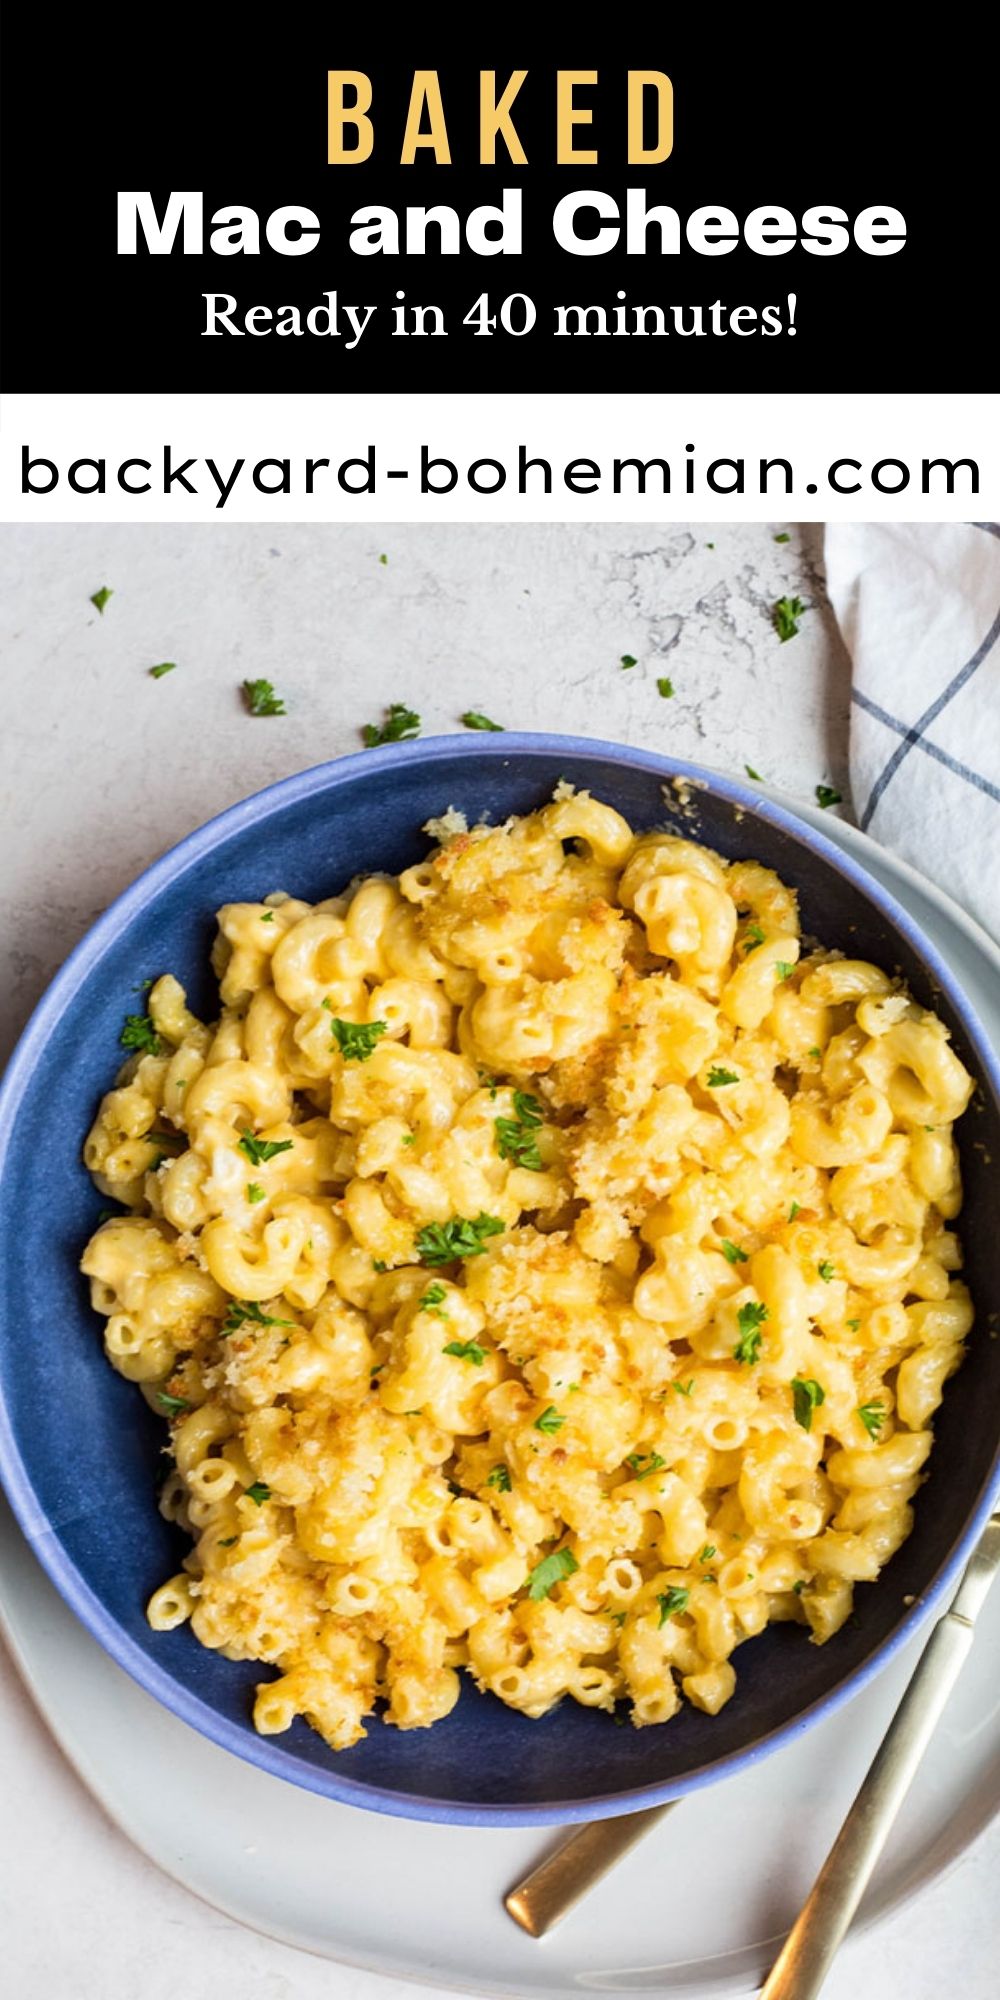 This southern style baked mac and cheese is extra creamy, cheesy, saucy, and ready in under 1 hour! This is true southern comfort food that is hearty, wholesome, and filling! via @foodhussy